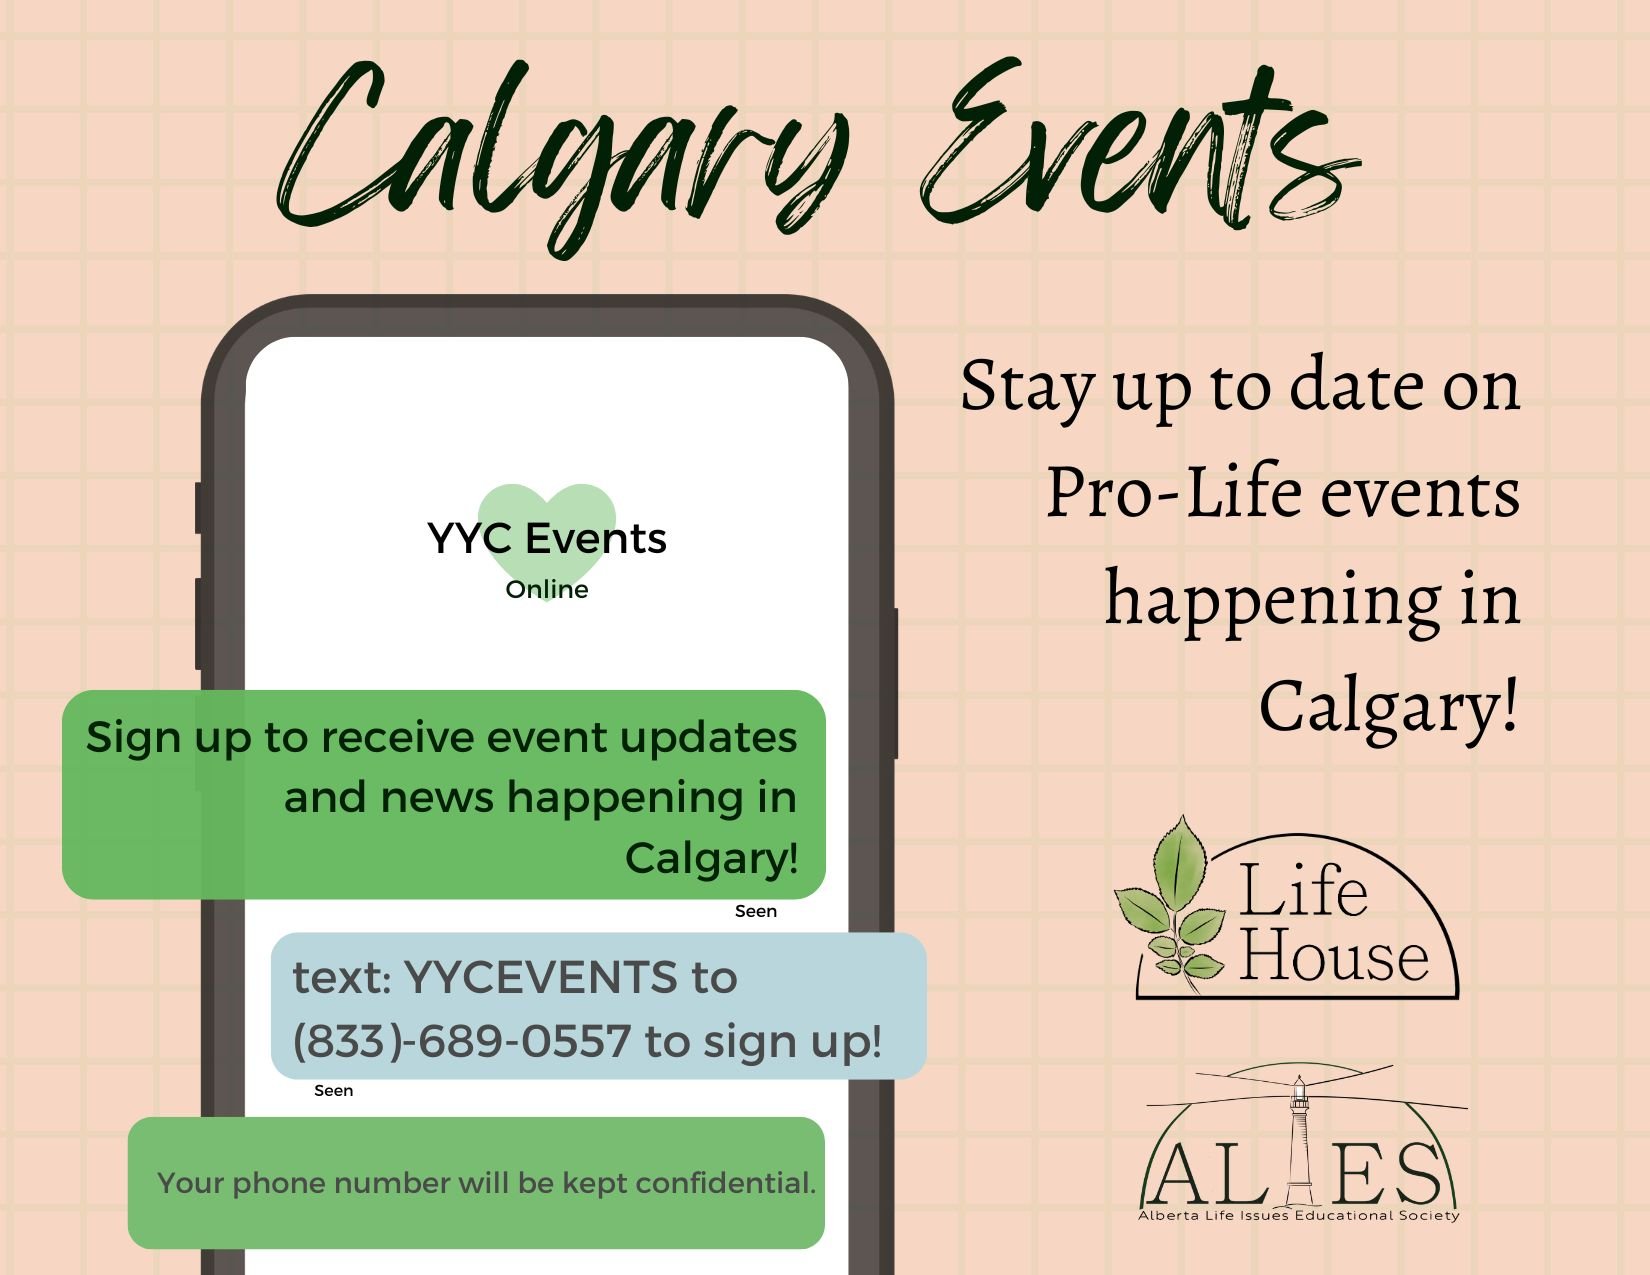 Stay up to date on Pro-Life events happening in Calgary and Edmonton!